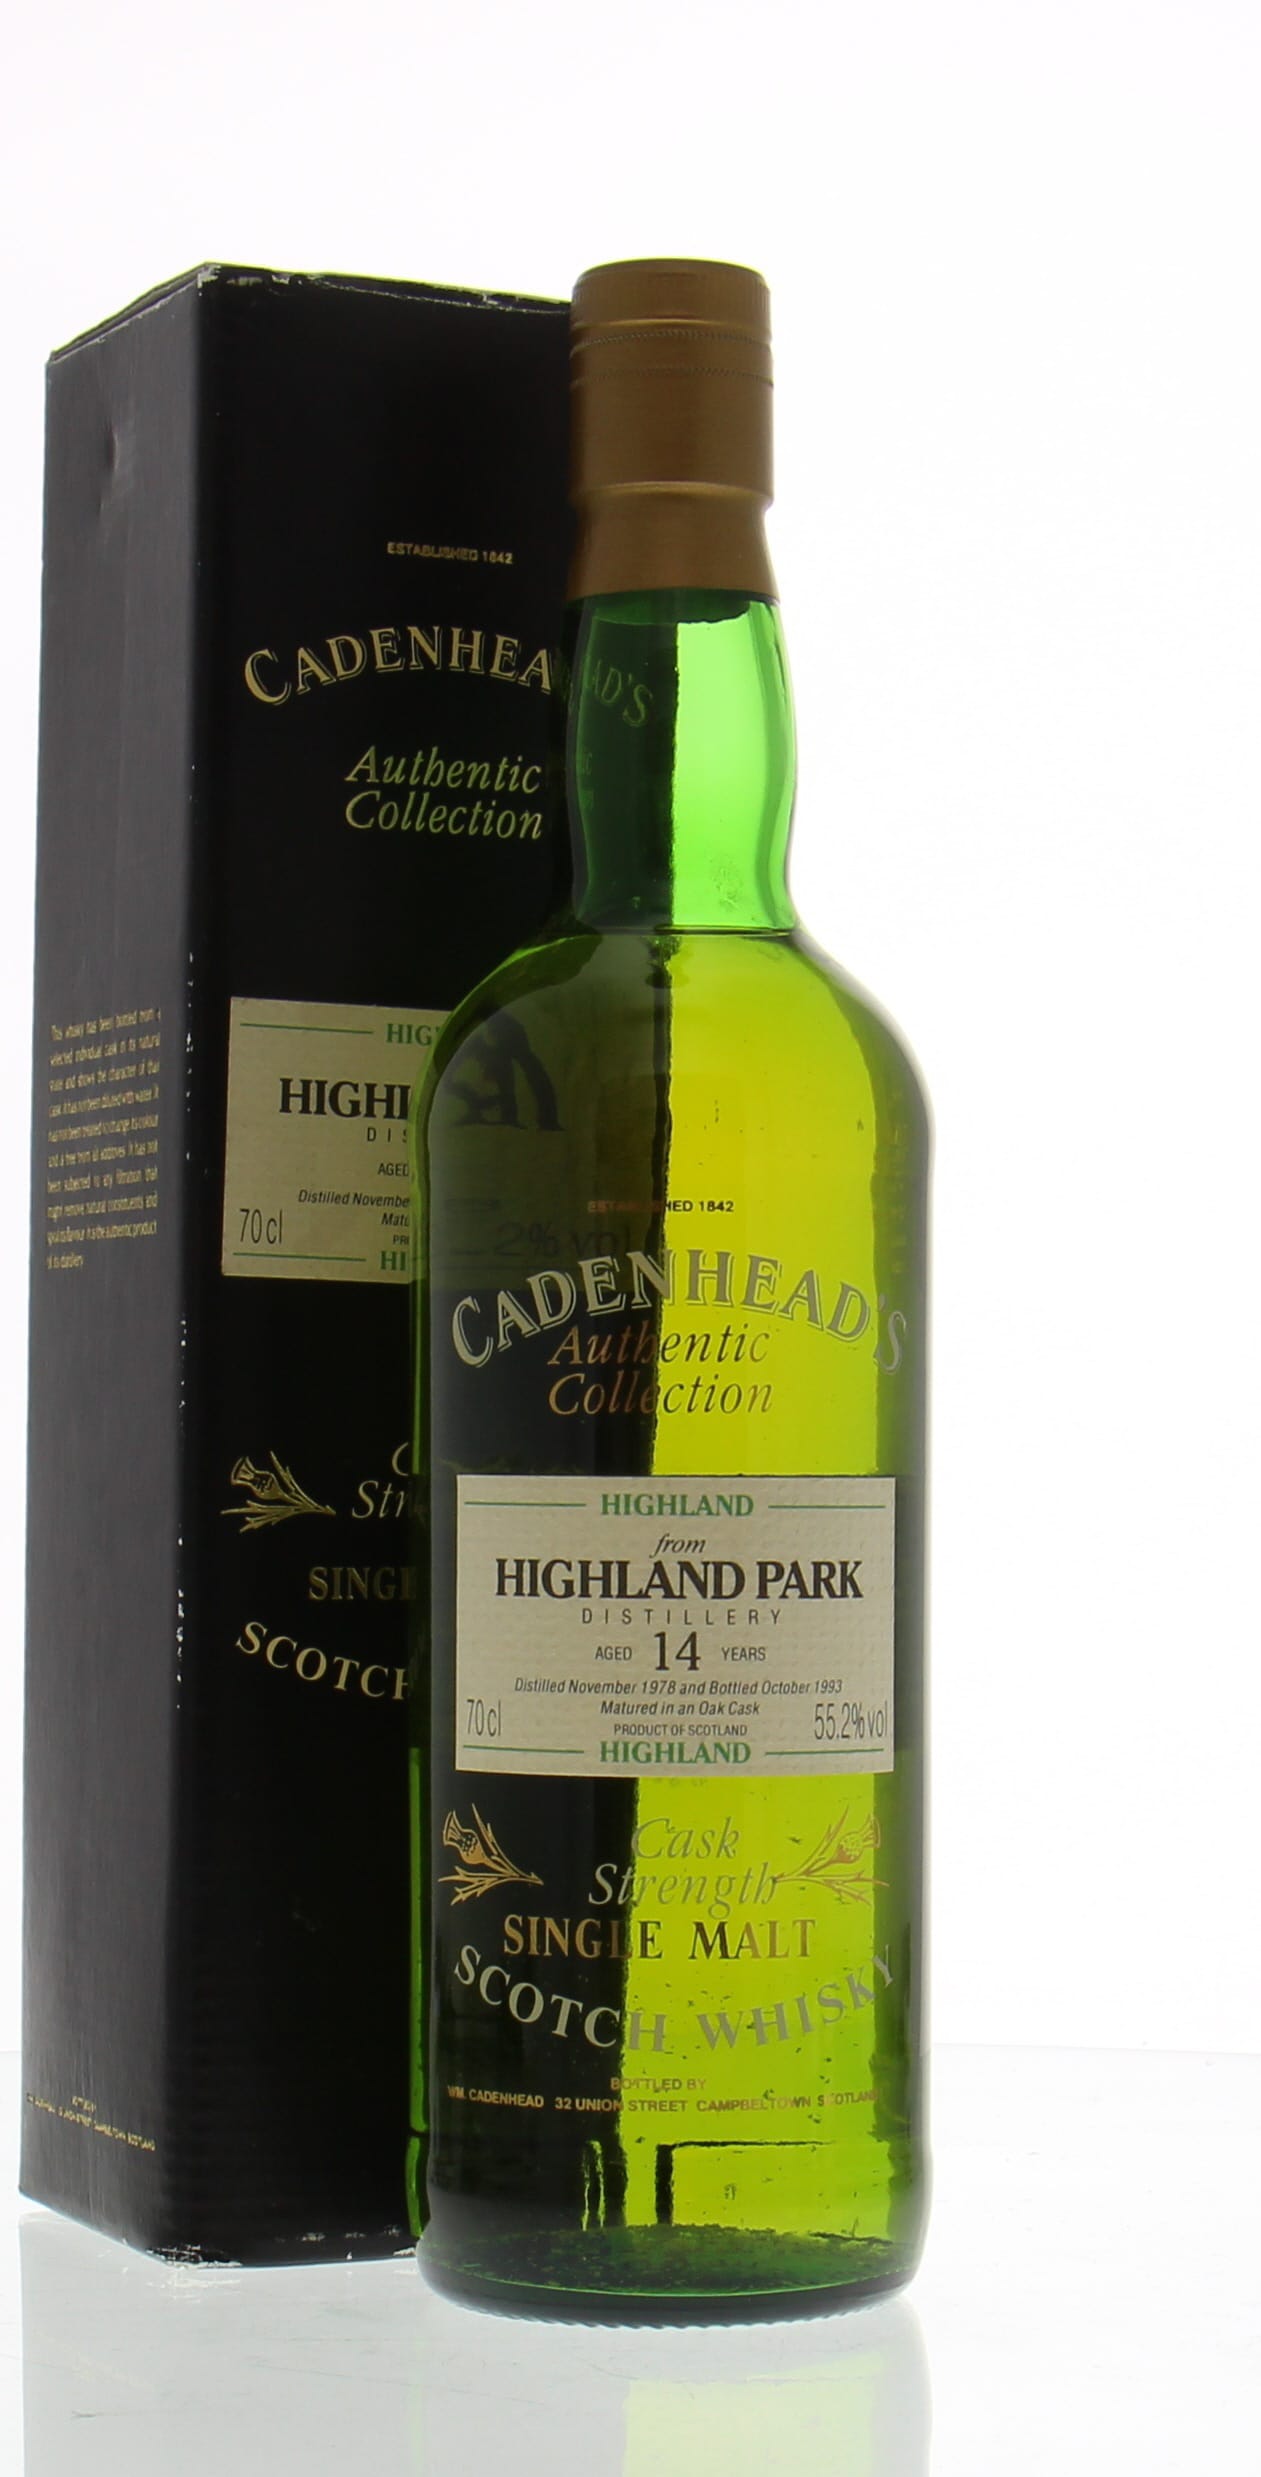 Highland Park - 14 Years Old Cadenhead 55.2% 1978 In Original Container